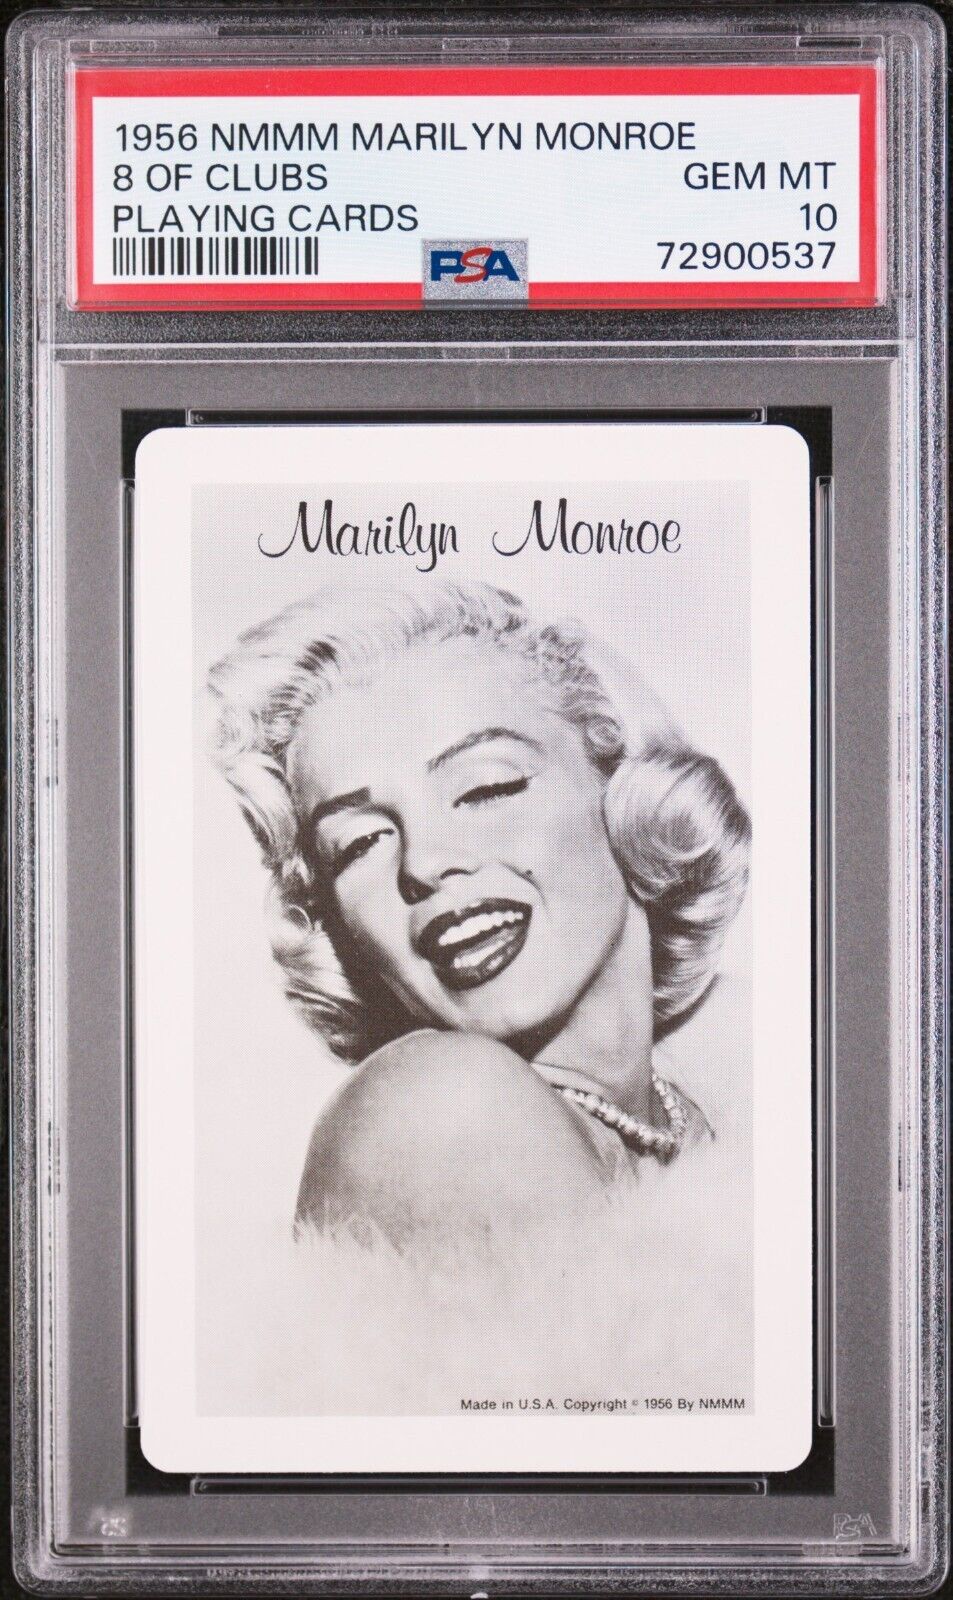 PSA 10 Marilyn Monroe 1956 NMMM 8 Of Clubs Playing Card Trading Vintage Gem Mint